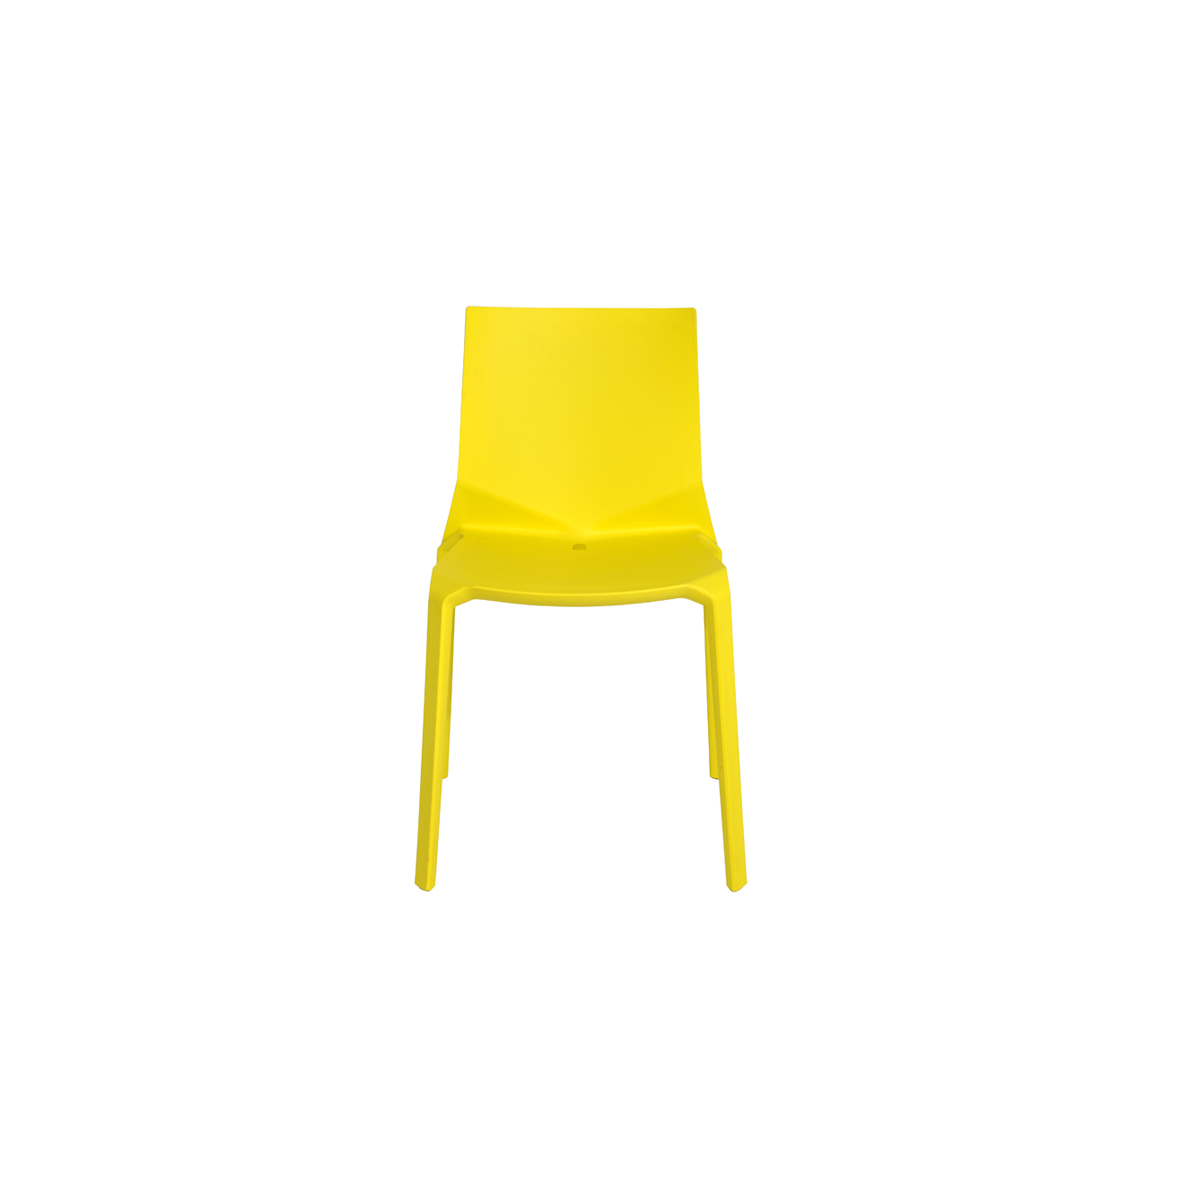 Origami Chair Yellow